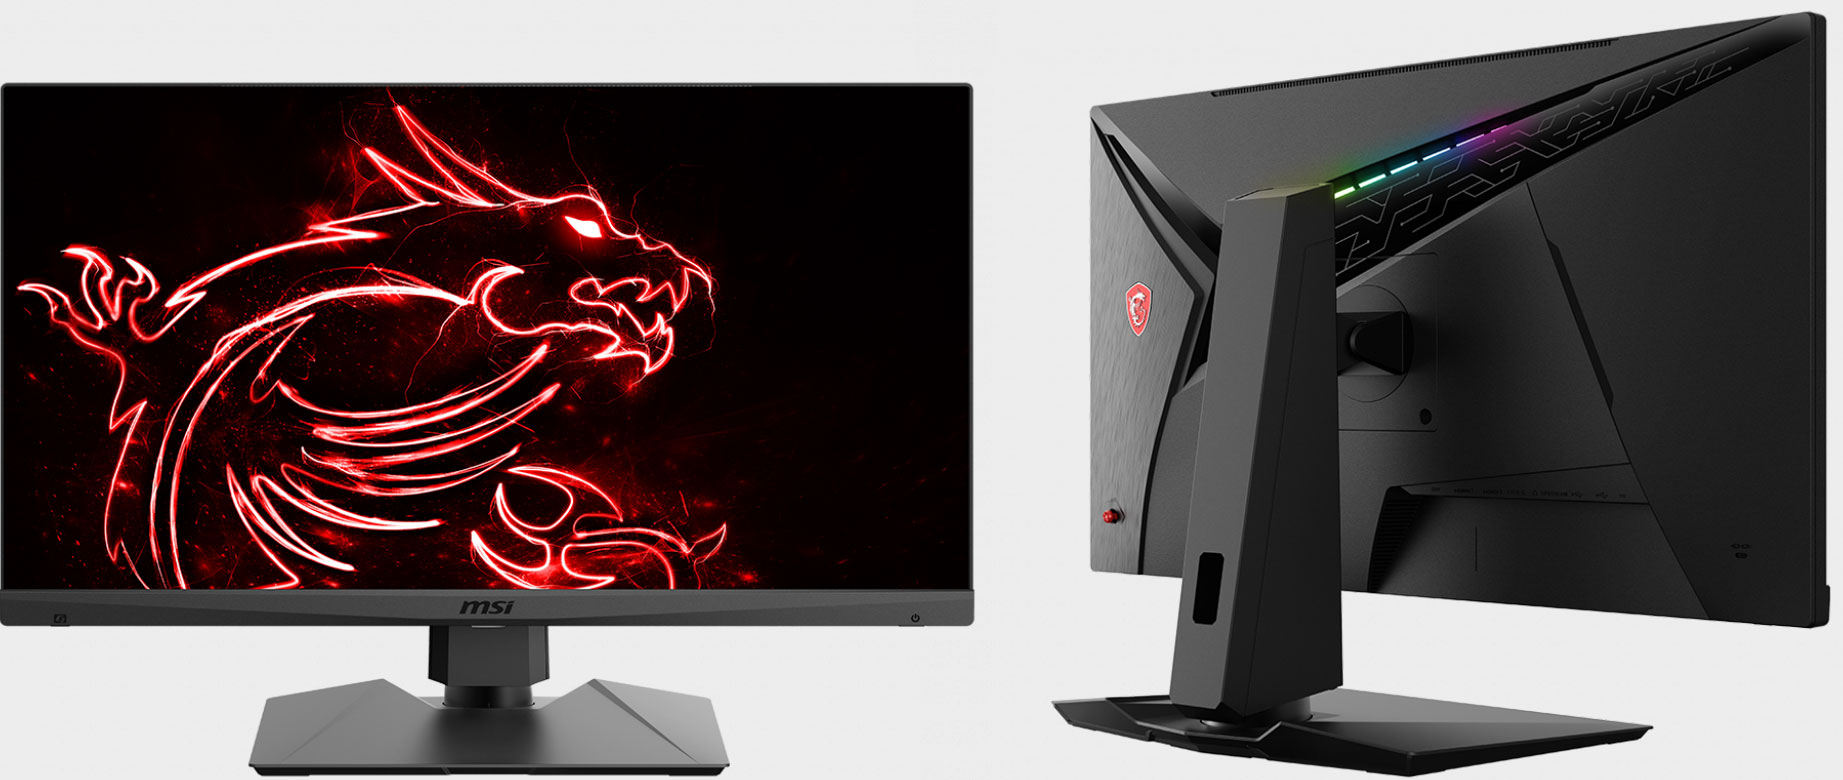 Msi Undercuts The Competition With A 165hz 27 Inch Gaming Monitor For 350 Pc Gamer